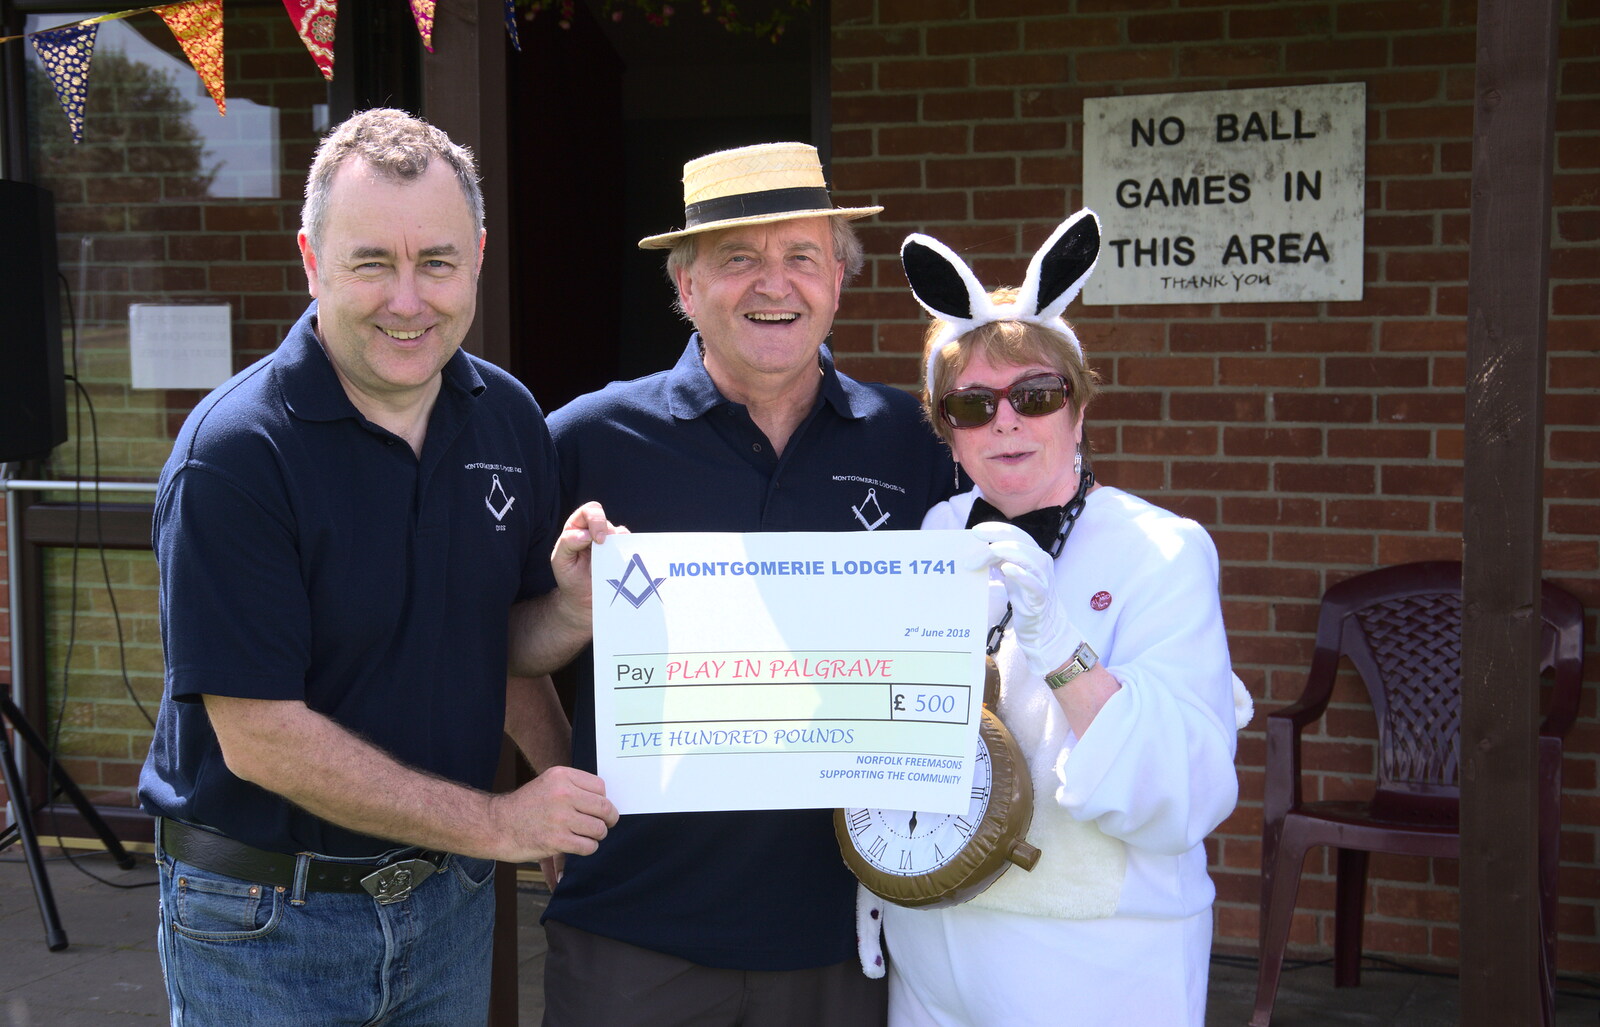 A cheque from the Montgomerie Lodge freemasons from The Not-Opening of the Palgrave Playground, Palgrave, Suffolk - 3rd June 2018